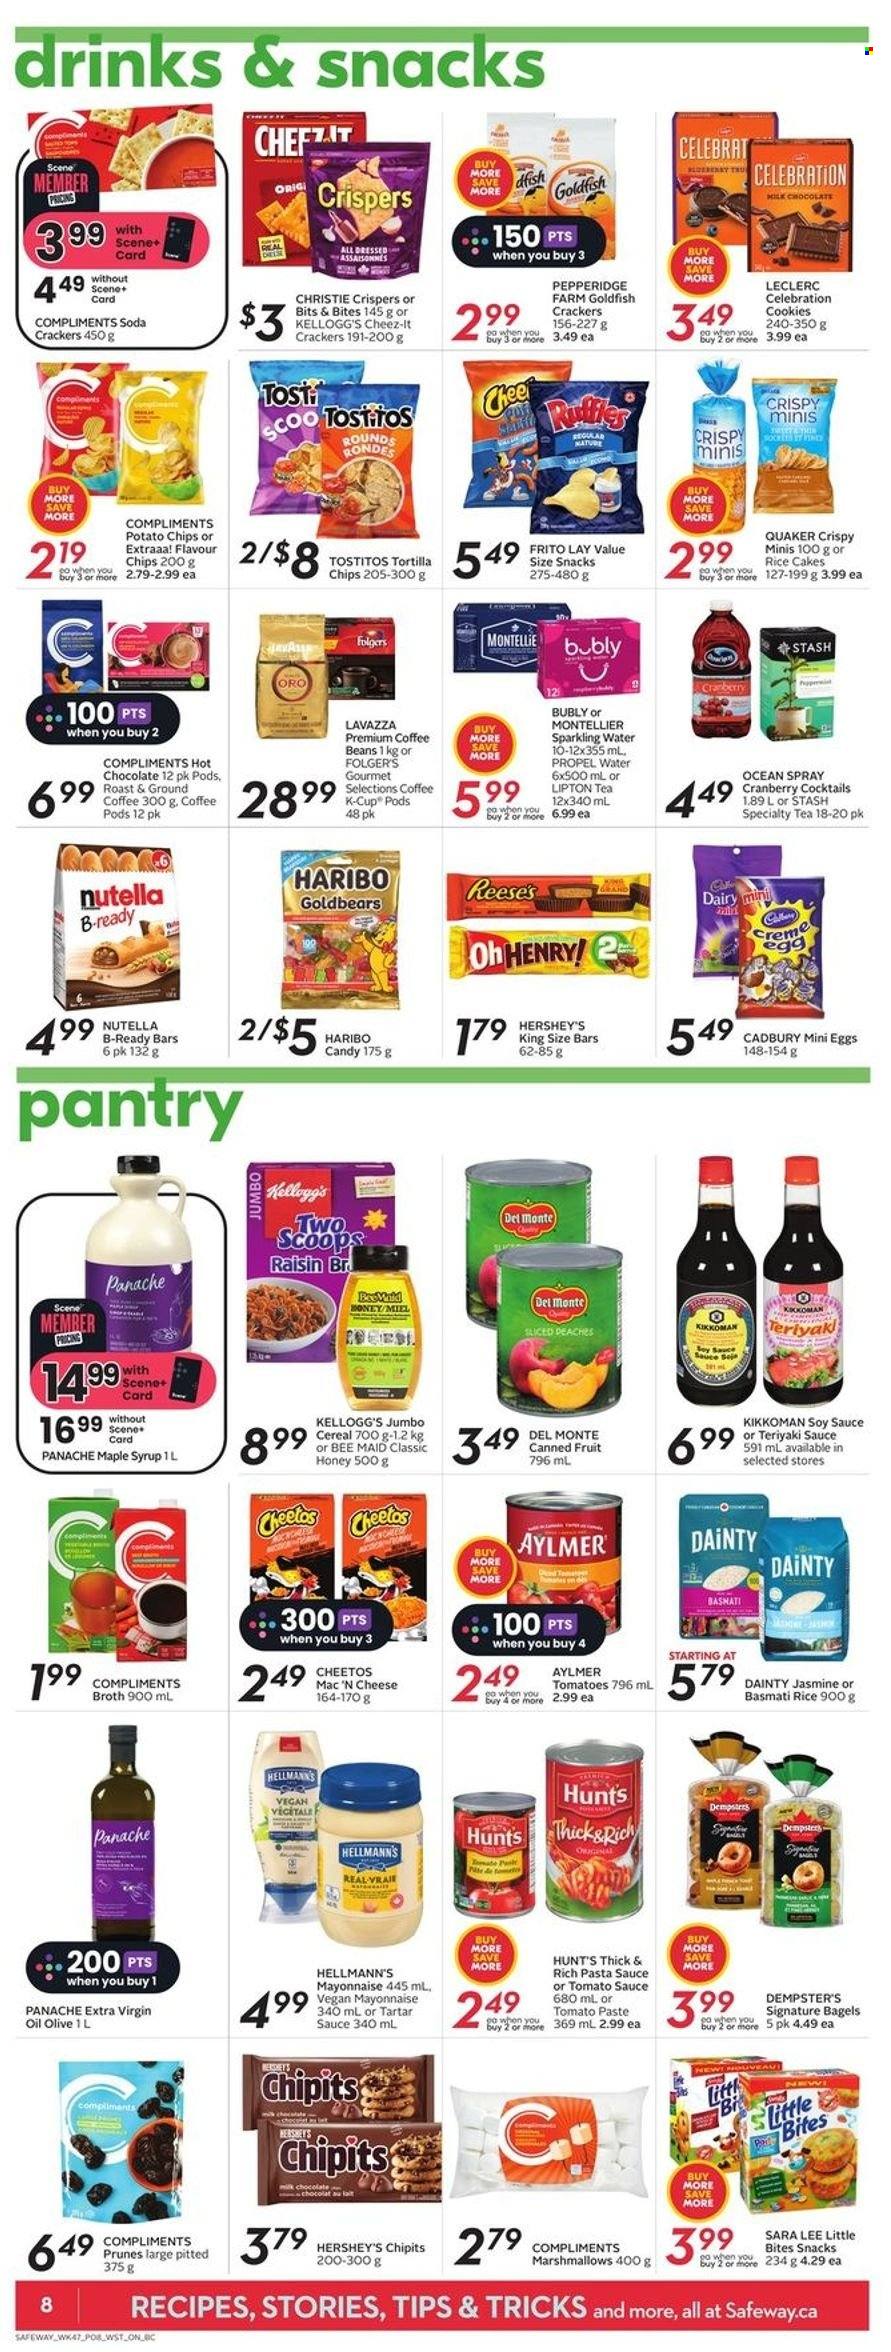 thumbnail - Safeway Flyer - March 23, 2023 - March 29, 2023 - Sales products - bagels, Sara Lee, peaches, pasta sauce, Quaker, roast, mayonnaise, tartar sauce, Hellmann’s, Reese's, Hershey's, cookies, marshmallows, milk chocolate, Haribo, Celebration, crackers, Kellogg's, Cadbury, chocolate egg, Little Bites, tortilla chips, potato chips, Cheetos, chips, Goldfish, Cheez-It, Ruffles, Tostitos, broth, tomato paste, tomato sauce, canned fruit, Del Monte, cereals, basmati rice, soy sauce, Kikkoman, teriyaki sauce, extra virgin olive oil, oil, maple syrup, honey, syrup, prunes, dried fruit, sparkling water, water, hot chocolate, tea, coffee, coffee pods, coffee beans, Folgers, ground coffee, coffee capsules, K-Cups, Lavazza, Nutella, Lipton. Page 15.